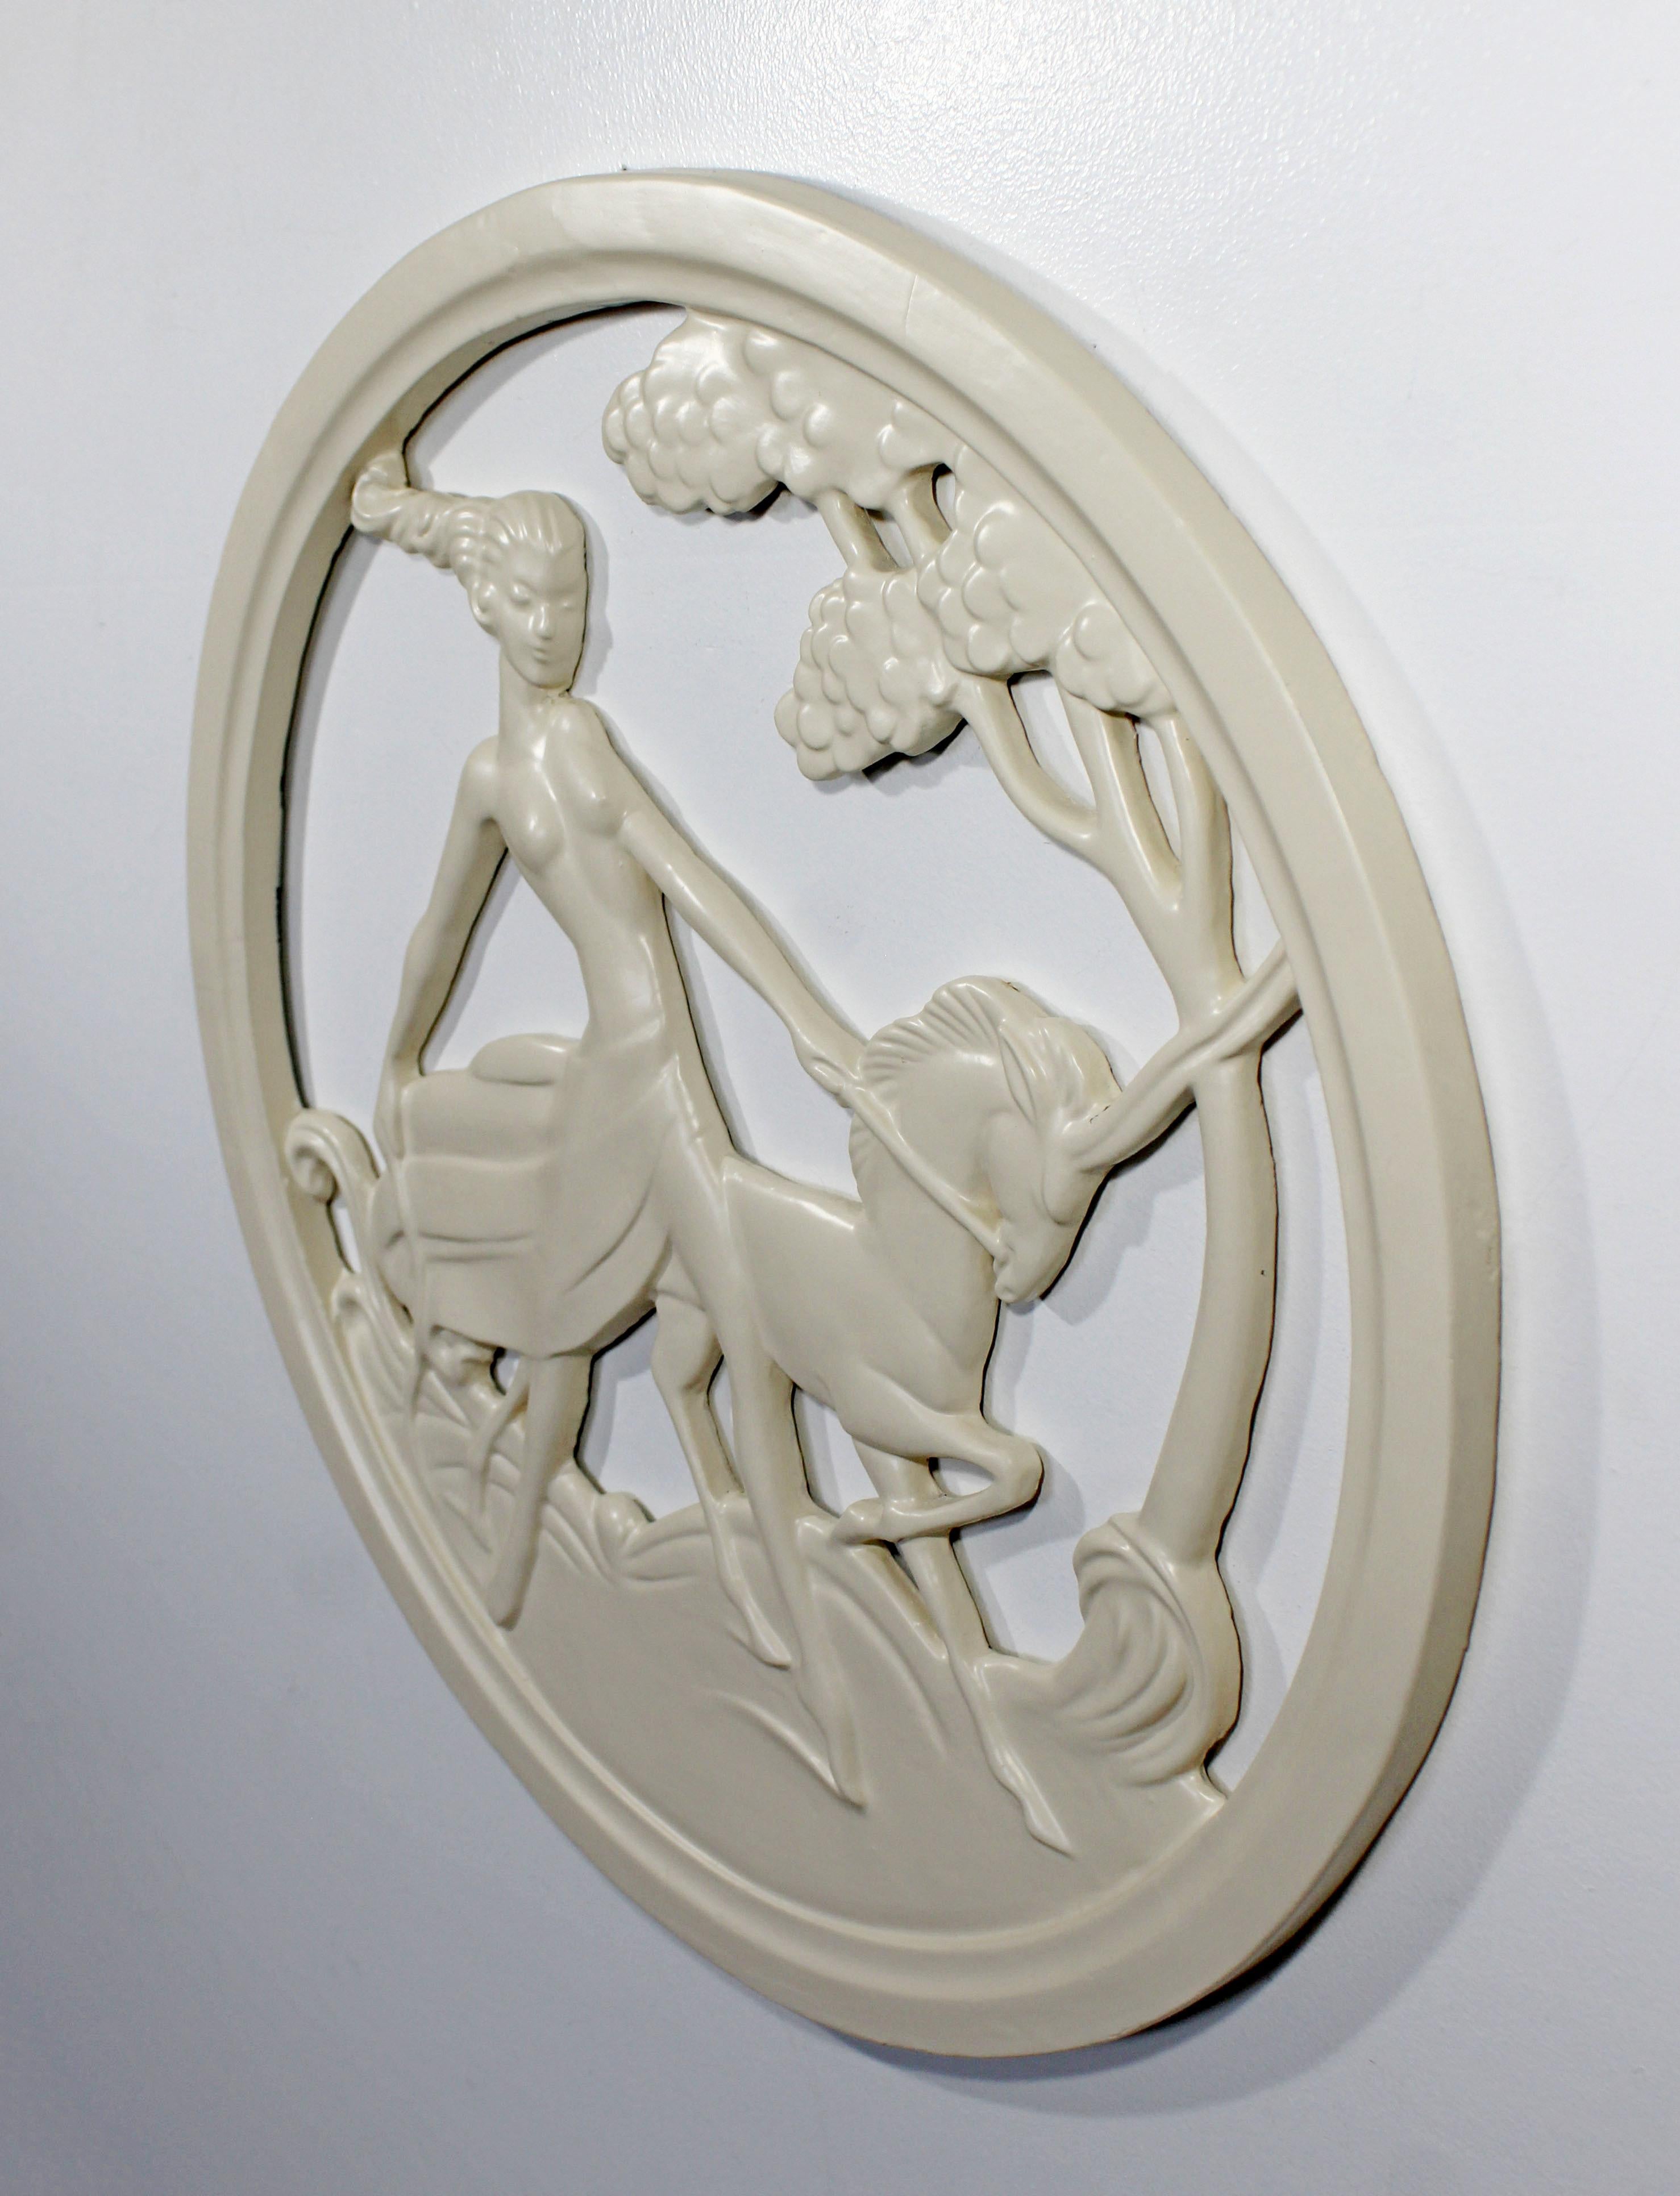 American Art Deco Plaster Medallion from a New Orleans Brothel of a Female on a Unicorn